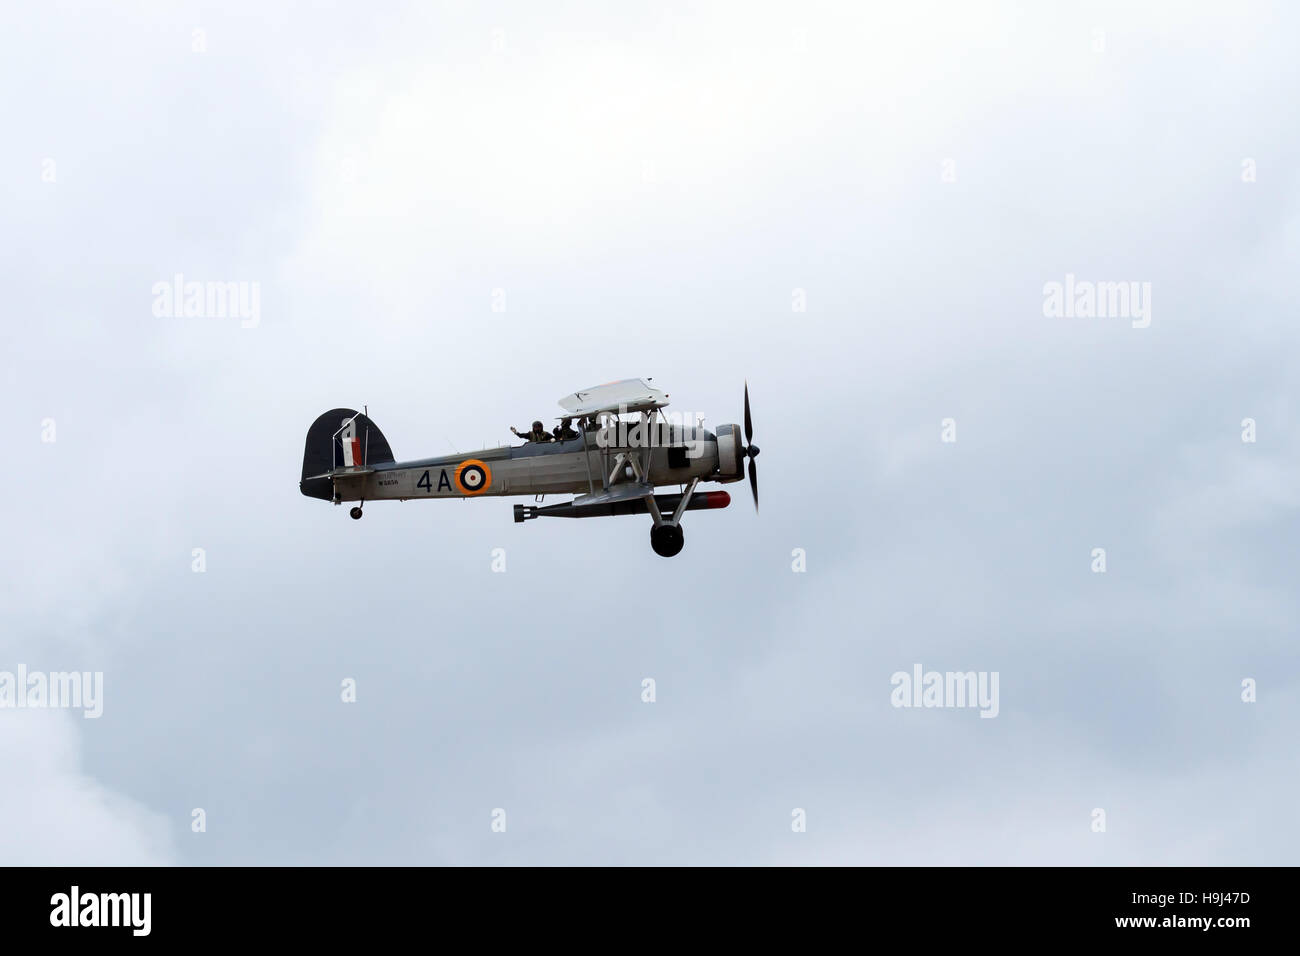 Royal Navy Fairey Swordfish biplane with air crew waving on flypast at the airshow Stock Photo